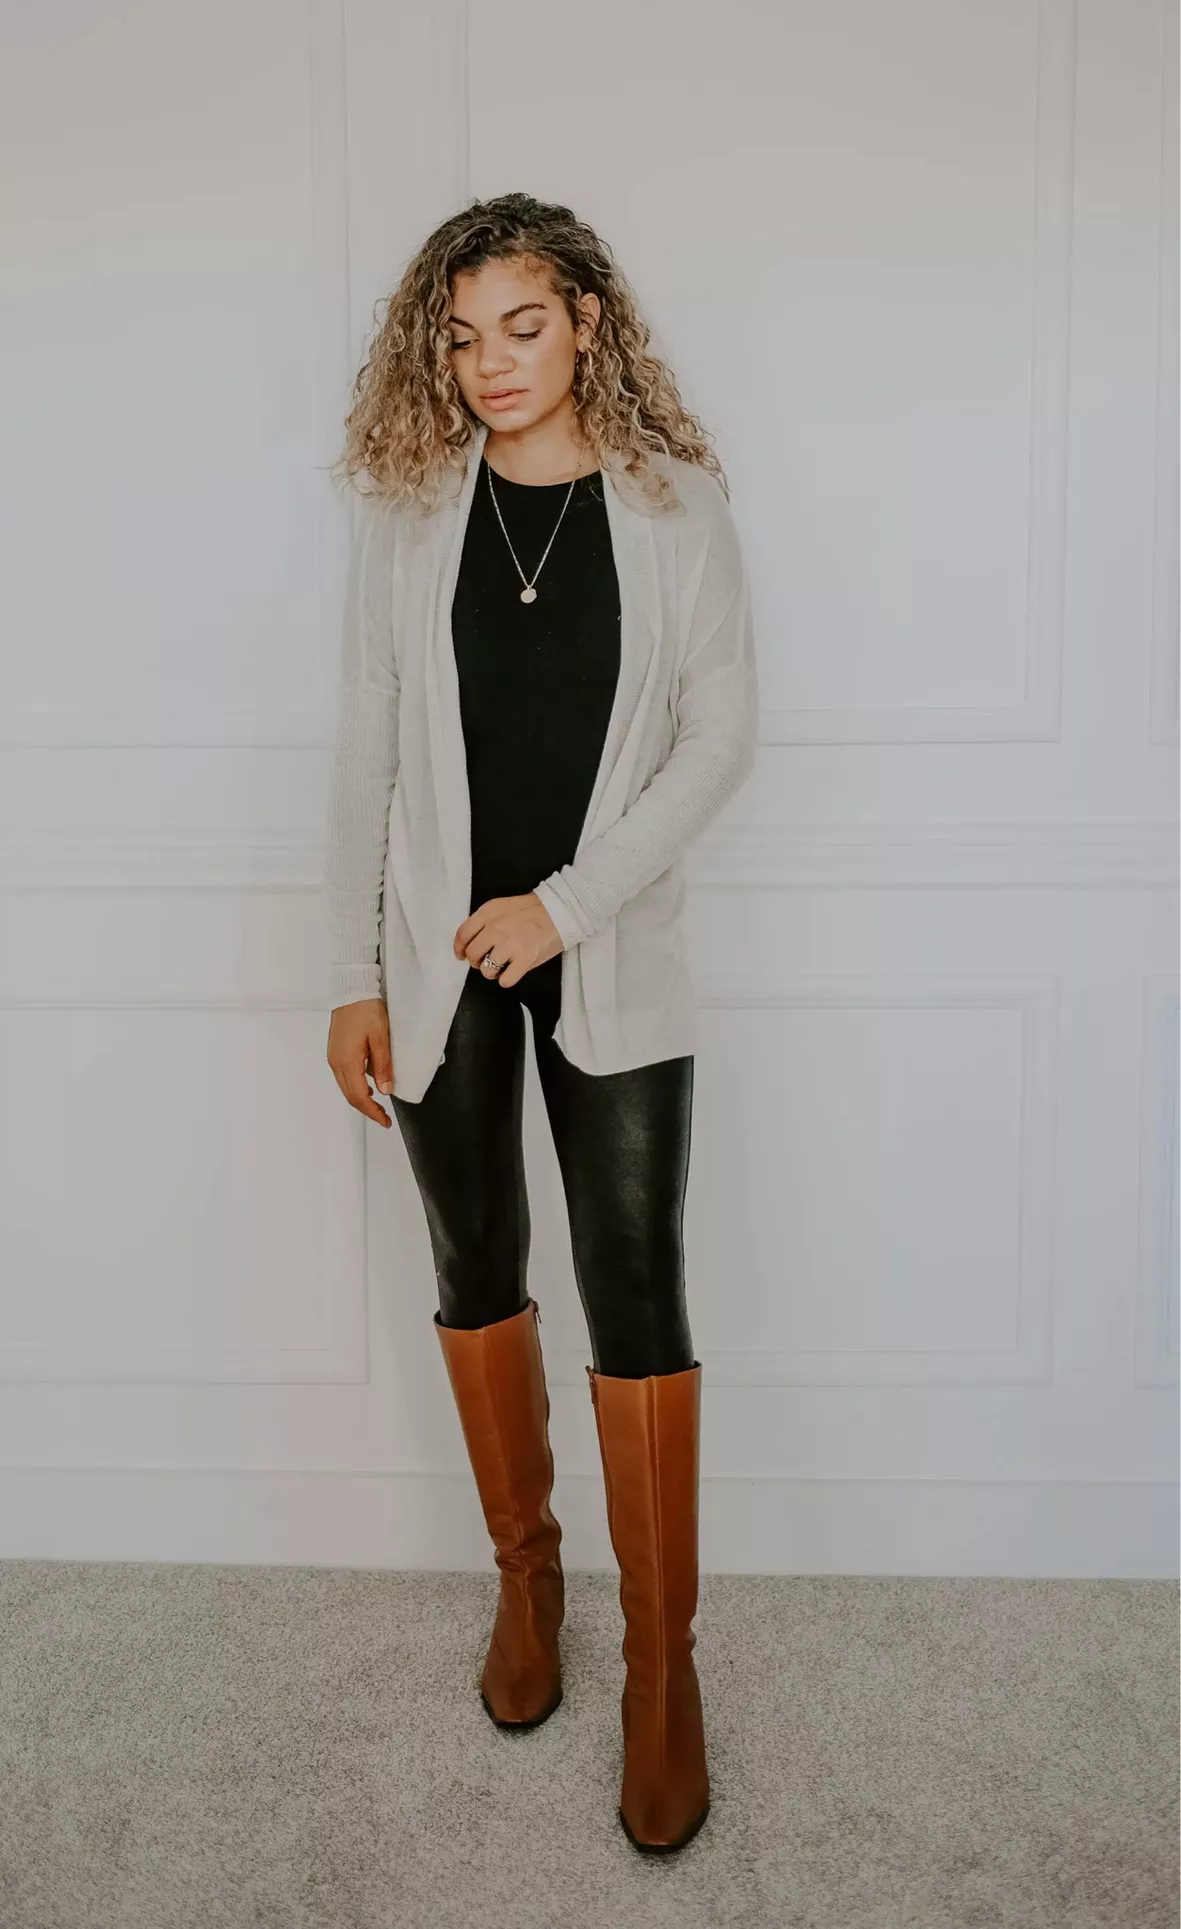 Dark Brown Leggings with Brown Knee High Boots Outfits (2 ideas & outfits)